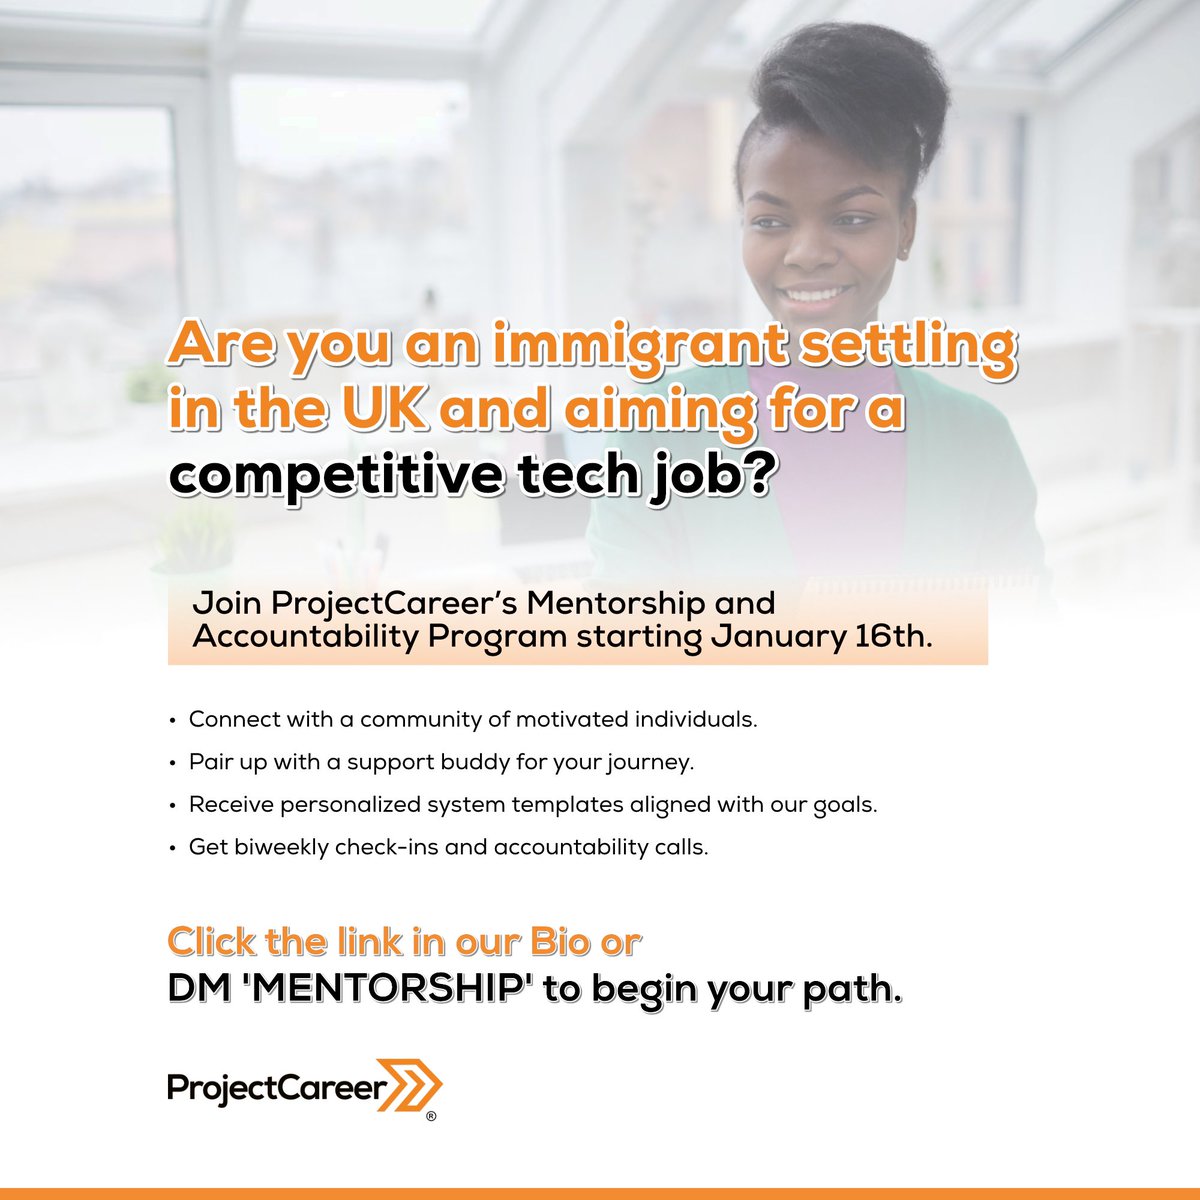 Embarking on a new chapter as an immigrant in the UK, striving for a competitive tech career? Join ProjectCareer’s Mentorship 
Program starting today!
Click the link in our Bio or DM ‘MENTORSHIP’ to begin your path with ProjectCareer. #TechCareer #MentorshipJourney #ProjectCareer